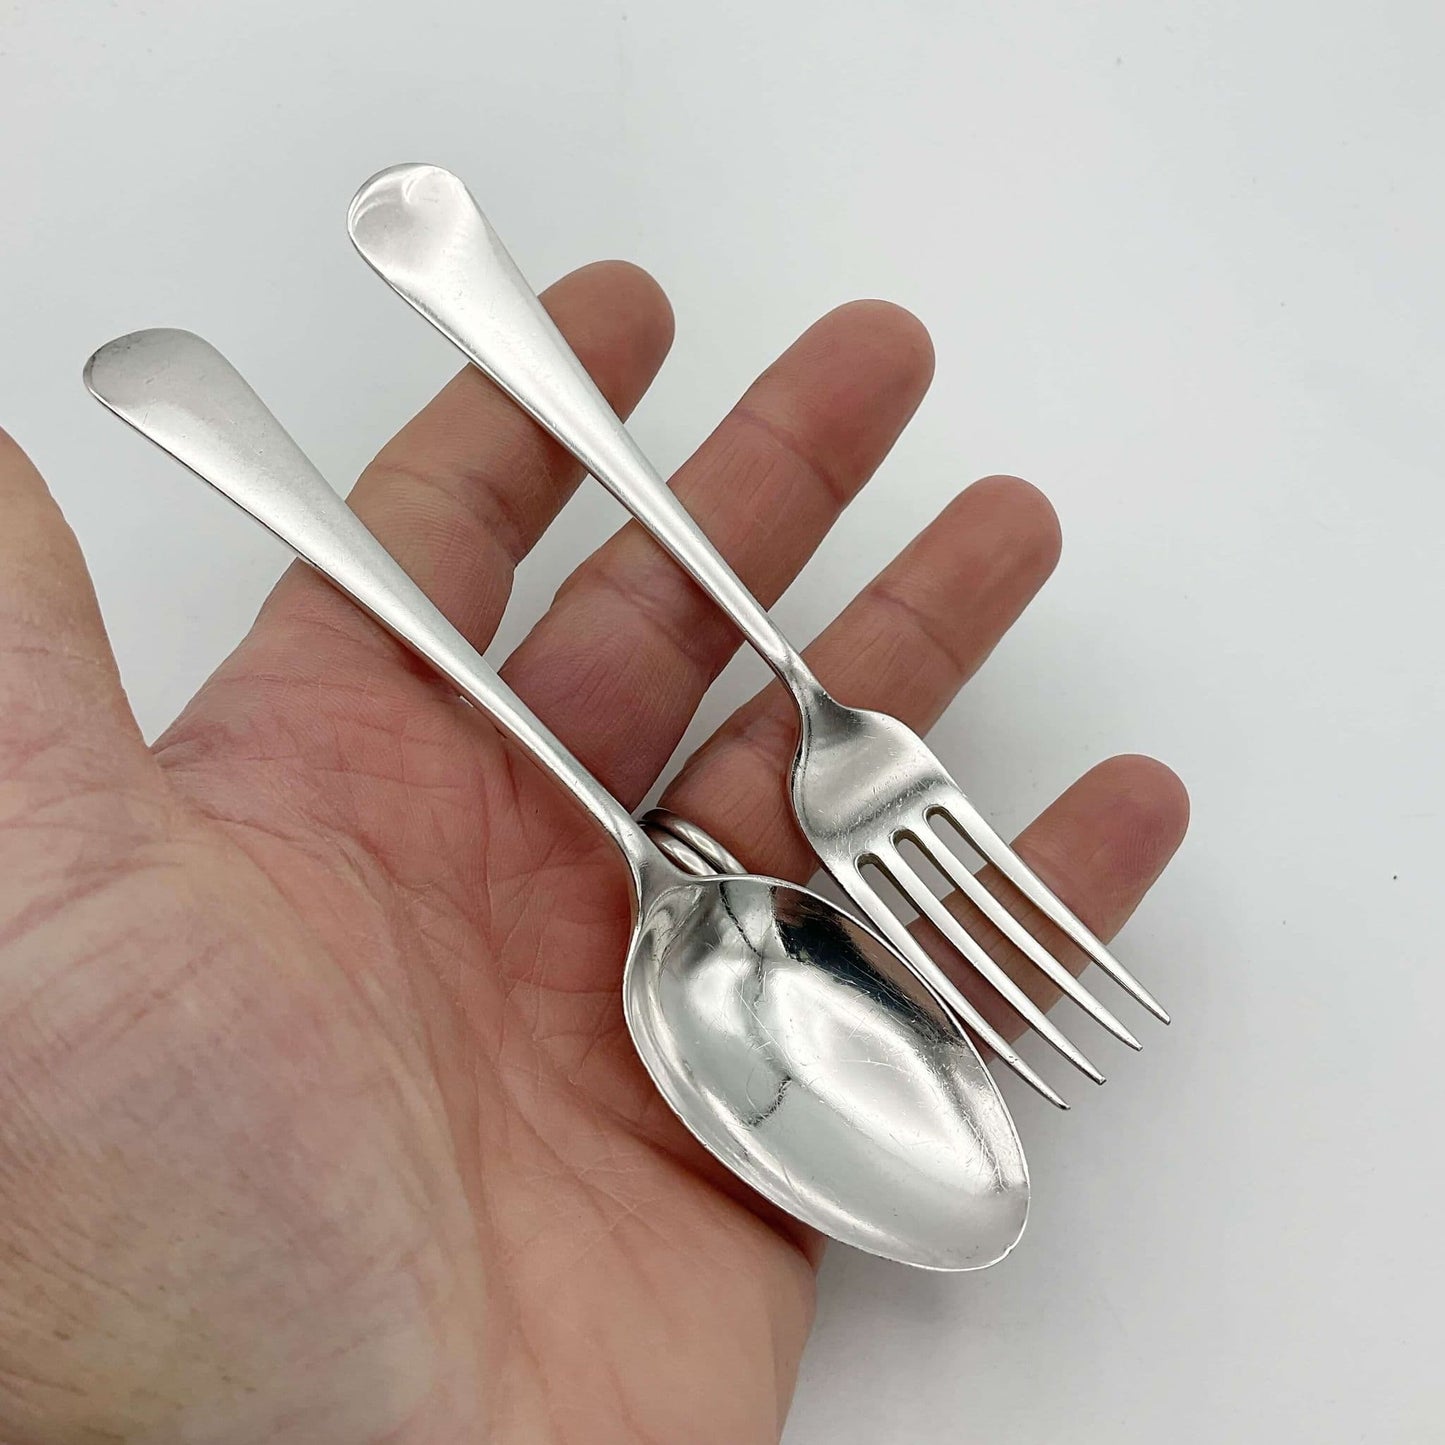 Small child’s spoon and fork set in a hand